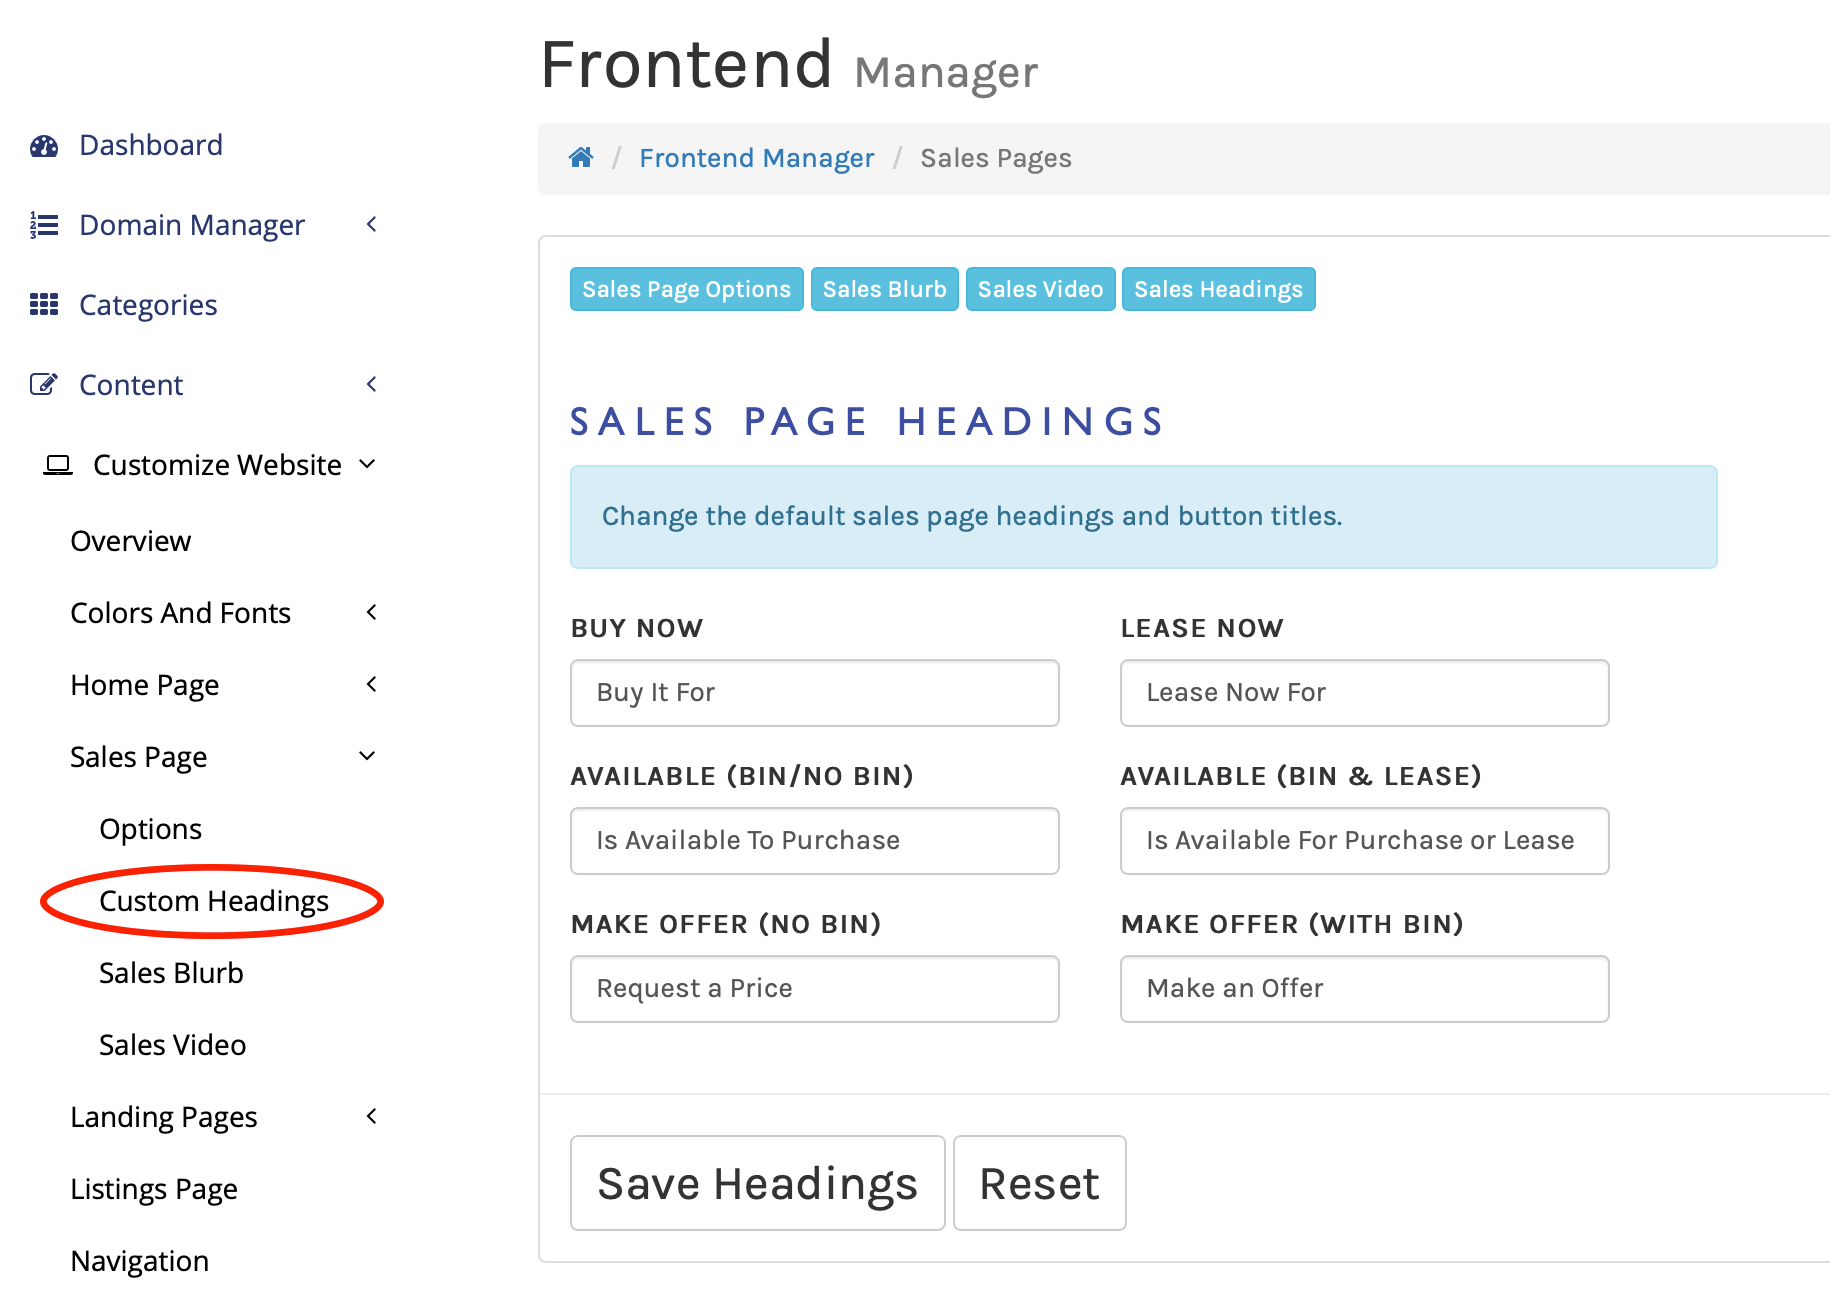 Customizing Headings in Sales Pages